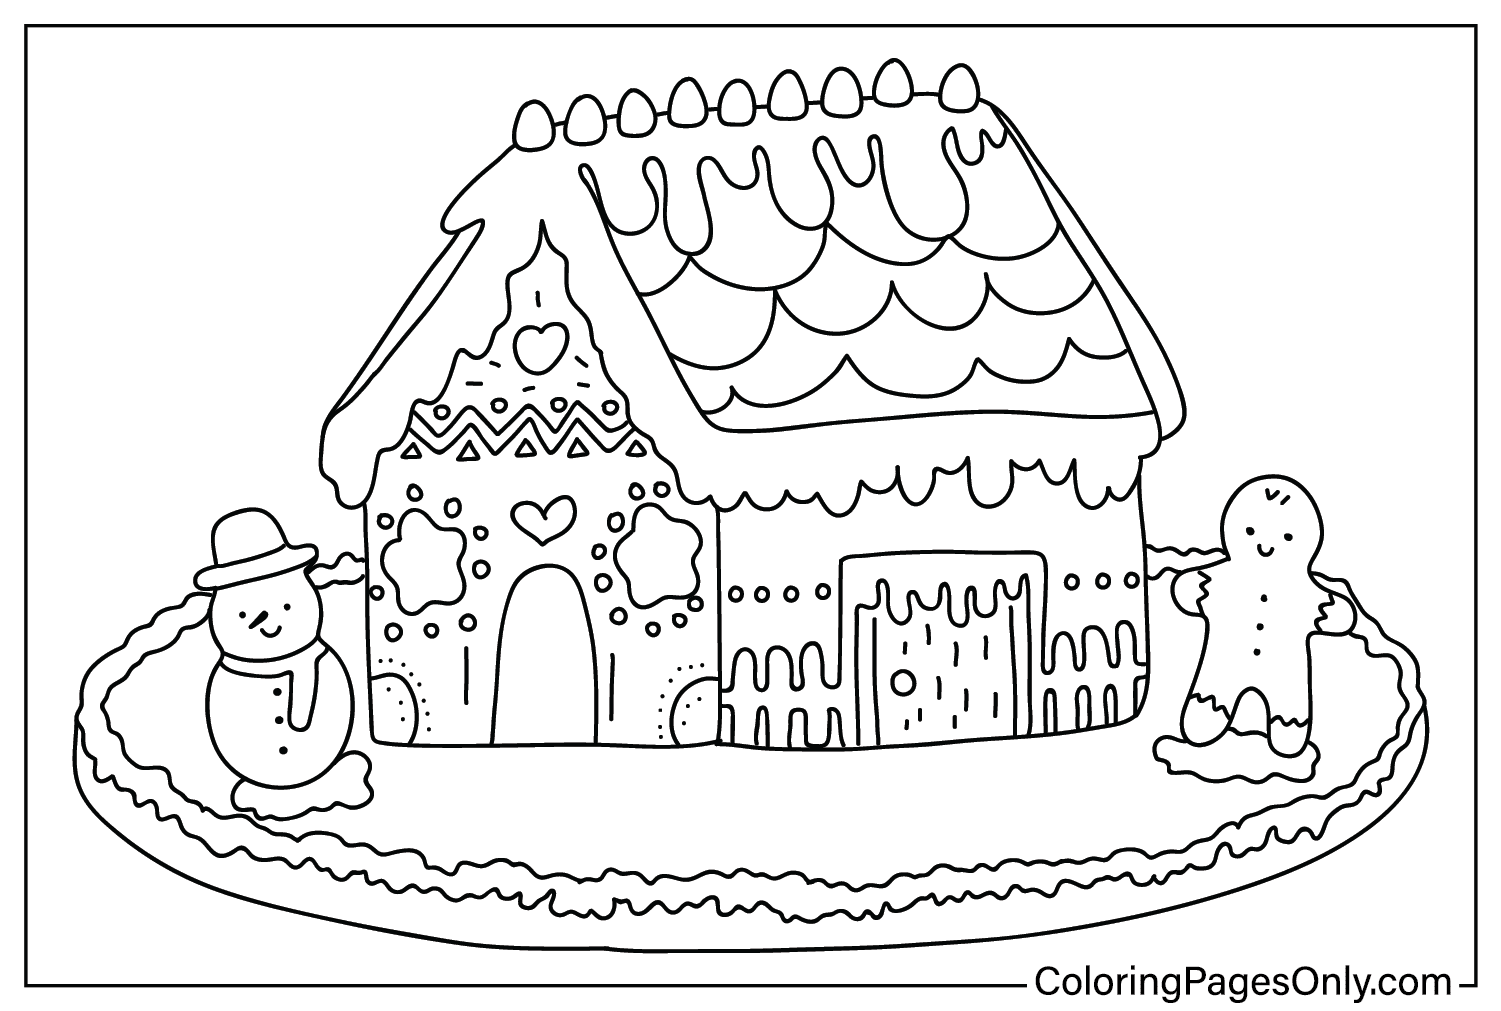 Gingerbread House Coloring Page Free Printable from Gingerbread House